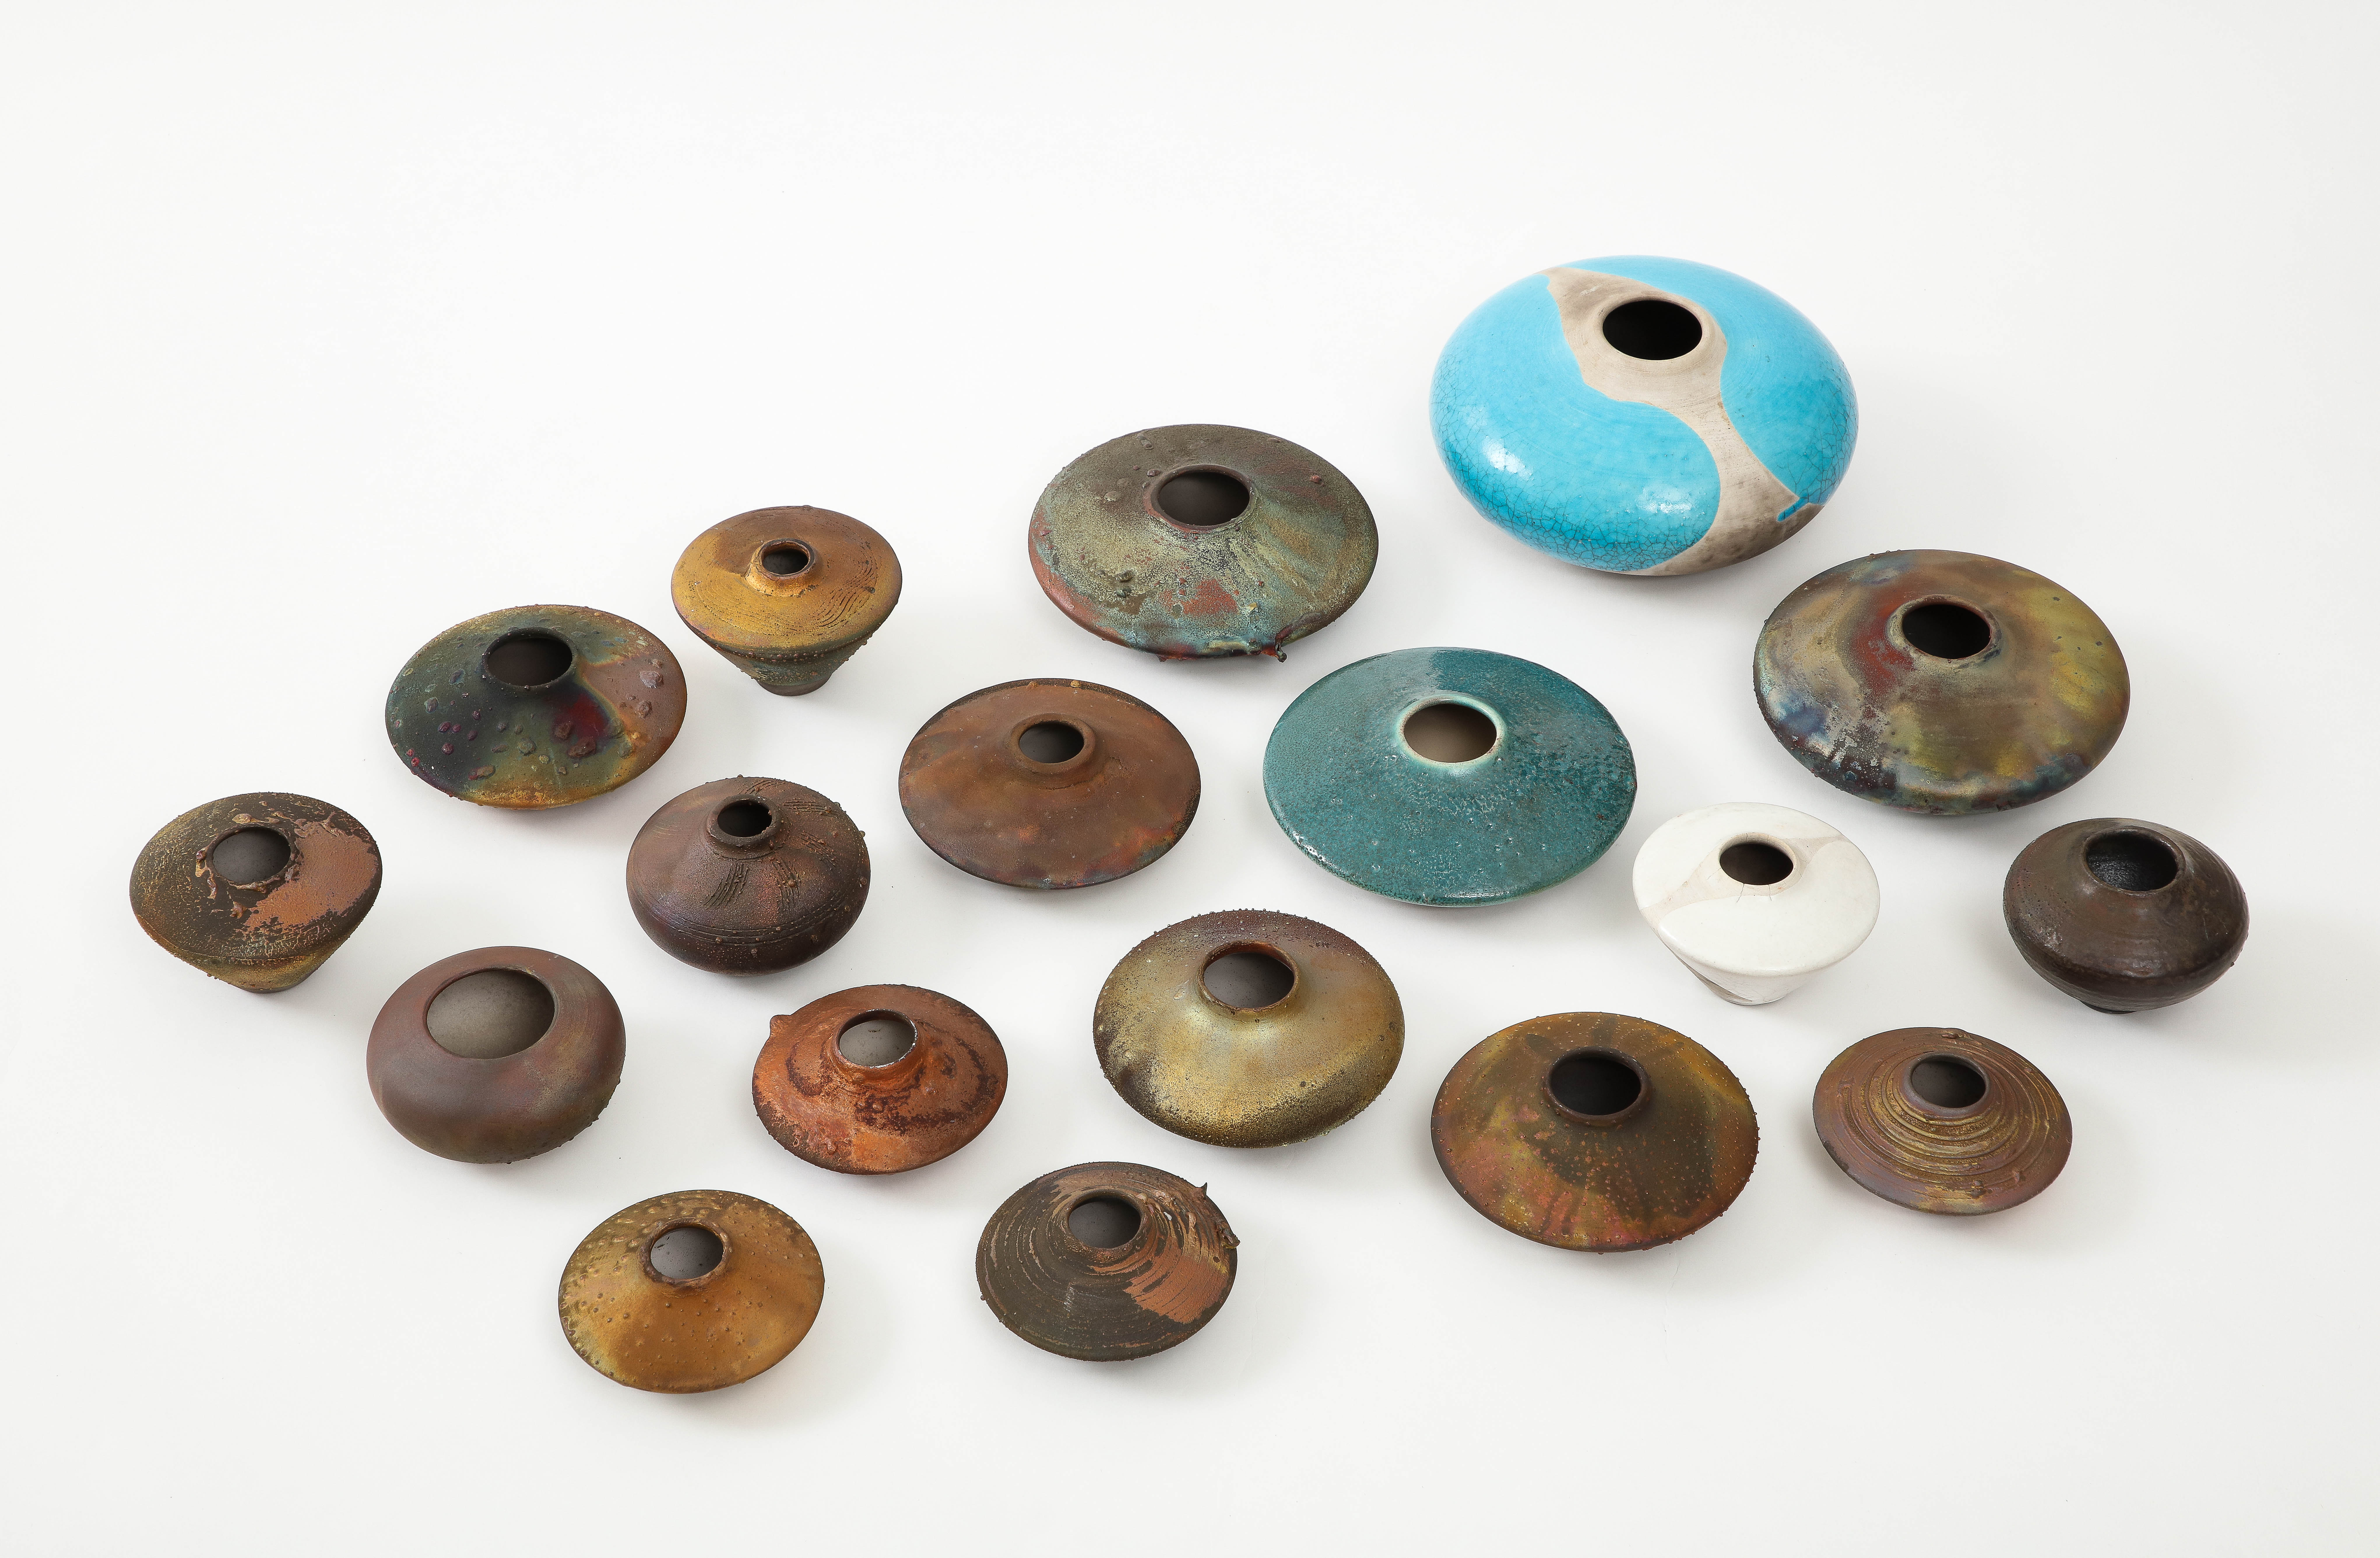 1970s-1990s modernist Raku pottery collection 0f 16 pieces by Woodstock, NY artist Norman Bacon.

Size varies the largest piece is 6.5'' diameter by 2.5'' height
The smallest piece is 4'' diameter by 2.75'' height.